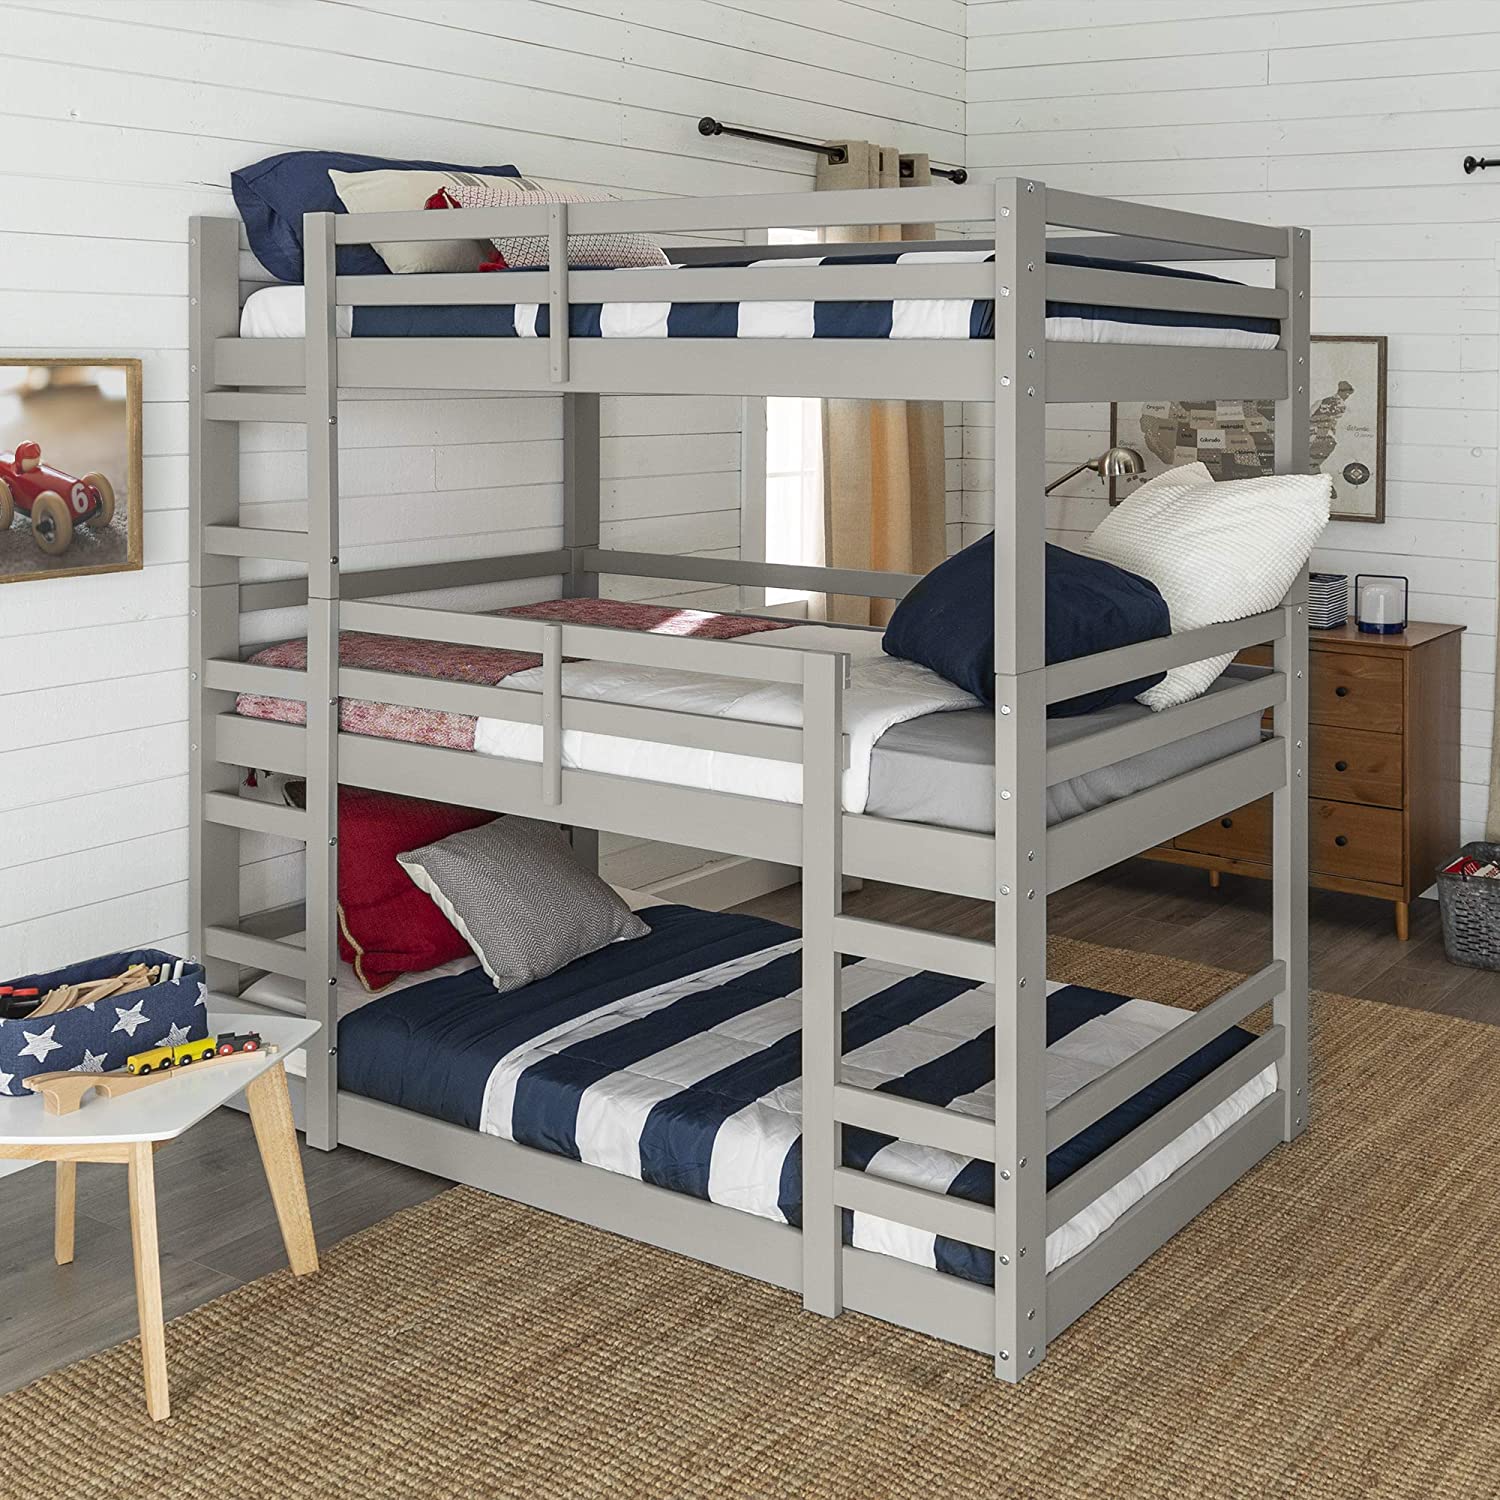 A Guide To Selecting The Best Bunk Bed For Your Child